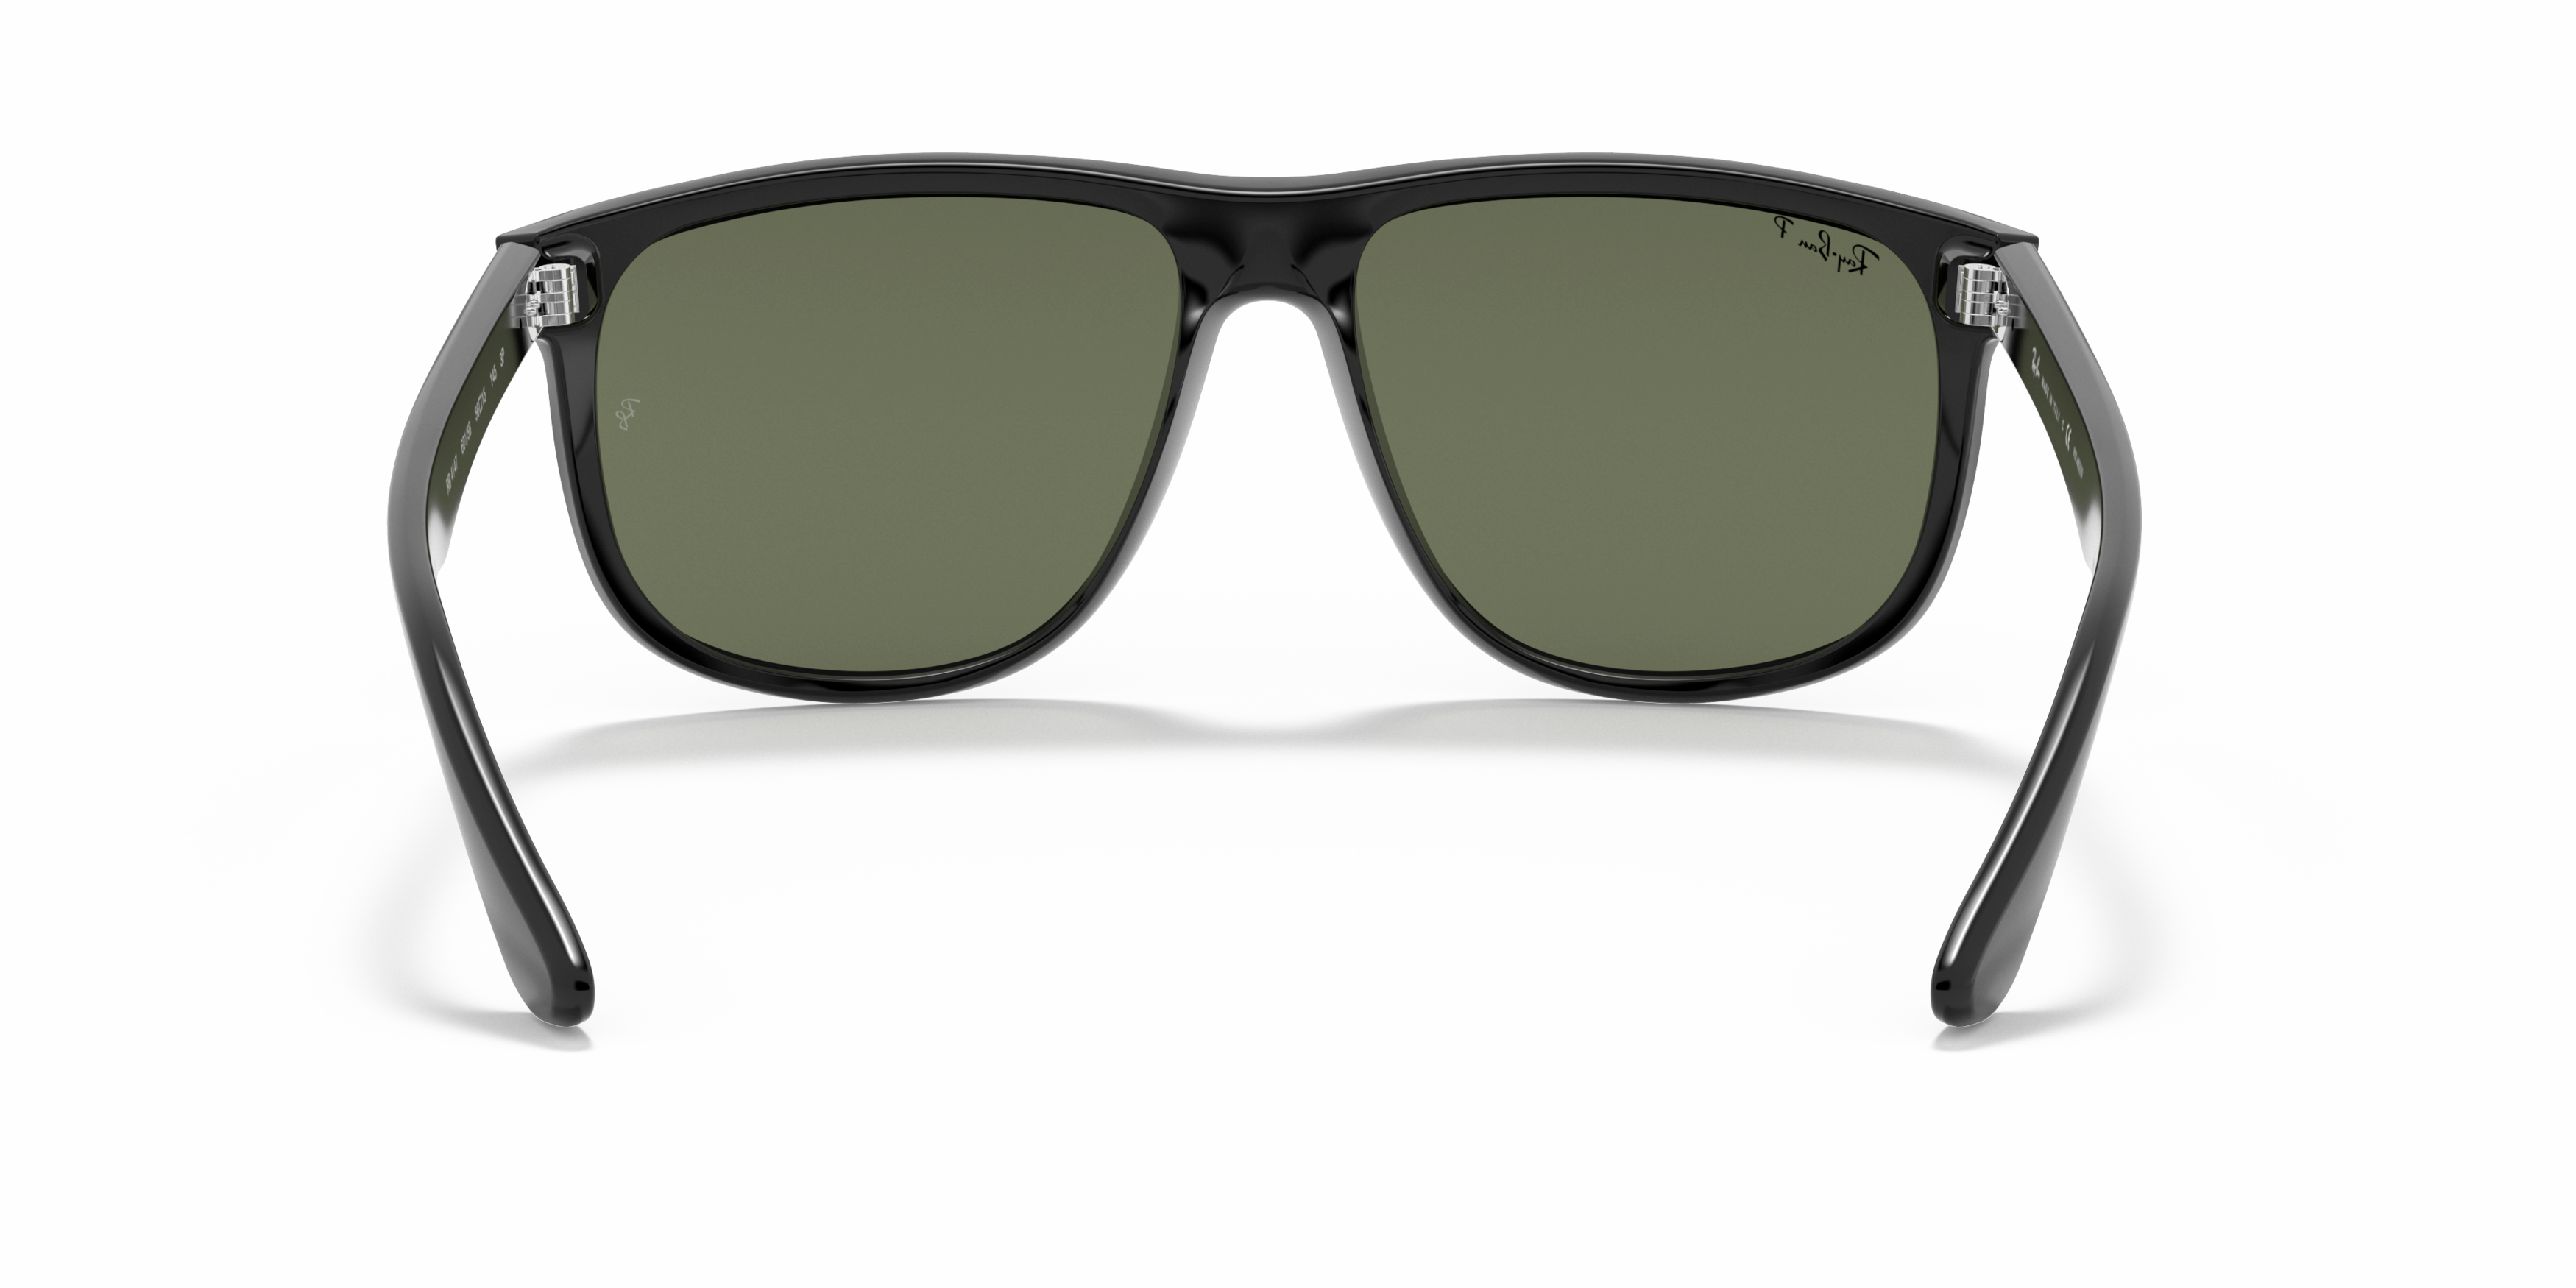 [products.image.detail02] Ray-Ban Boyfriend RB4147 601/58